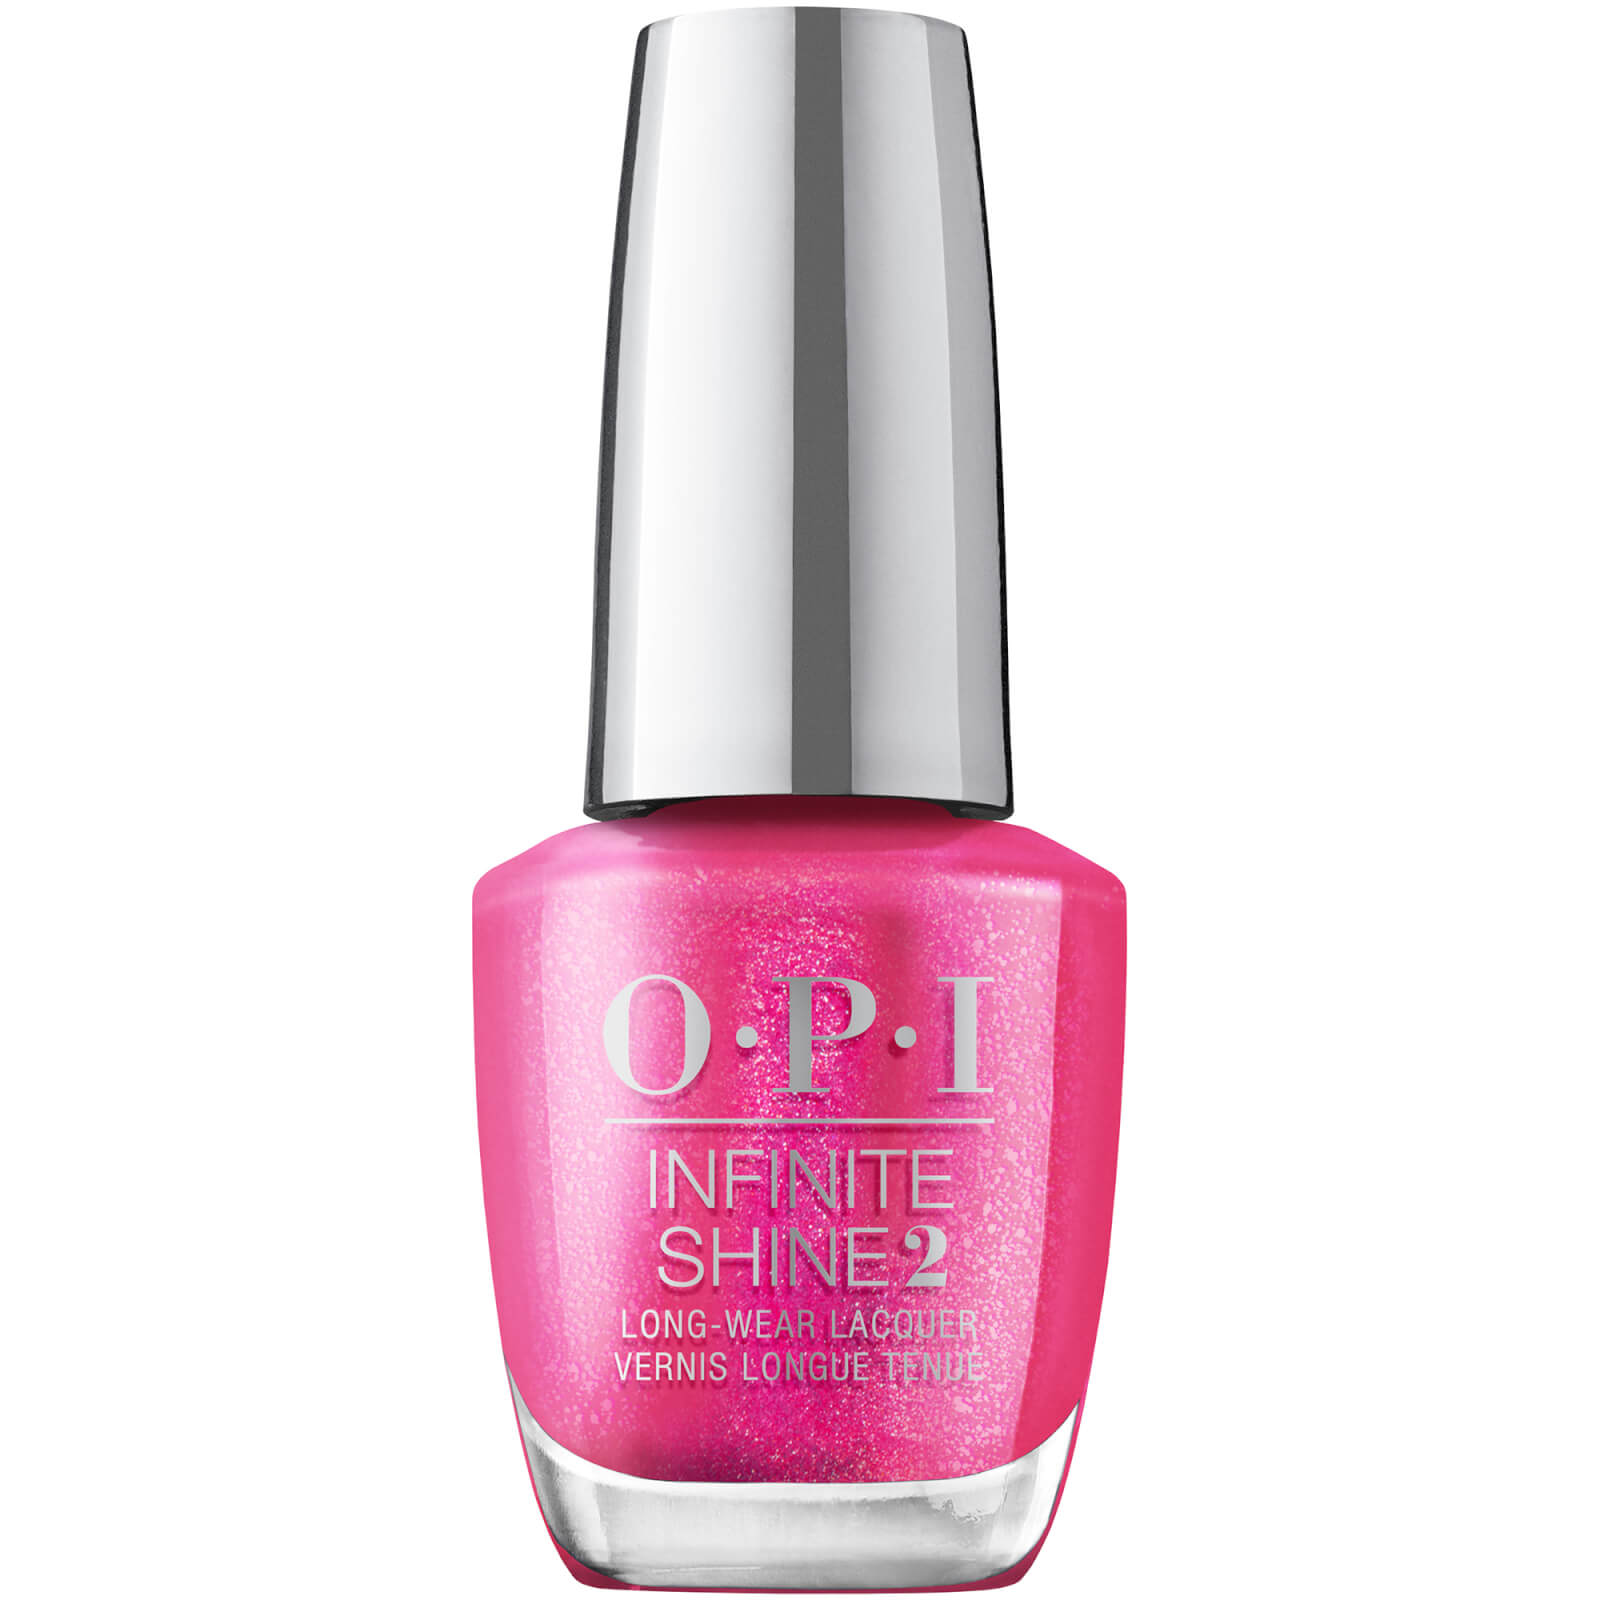 Opi Jewel Be Bold Collection Infinite Shine Nail Polish 15ml (various Shades) - Pink, Bling And Be Merry